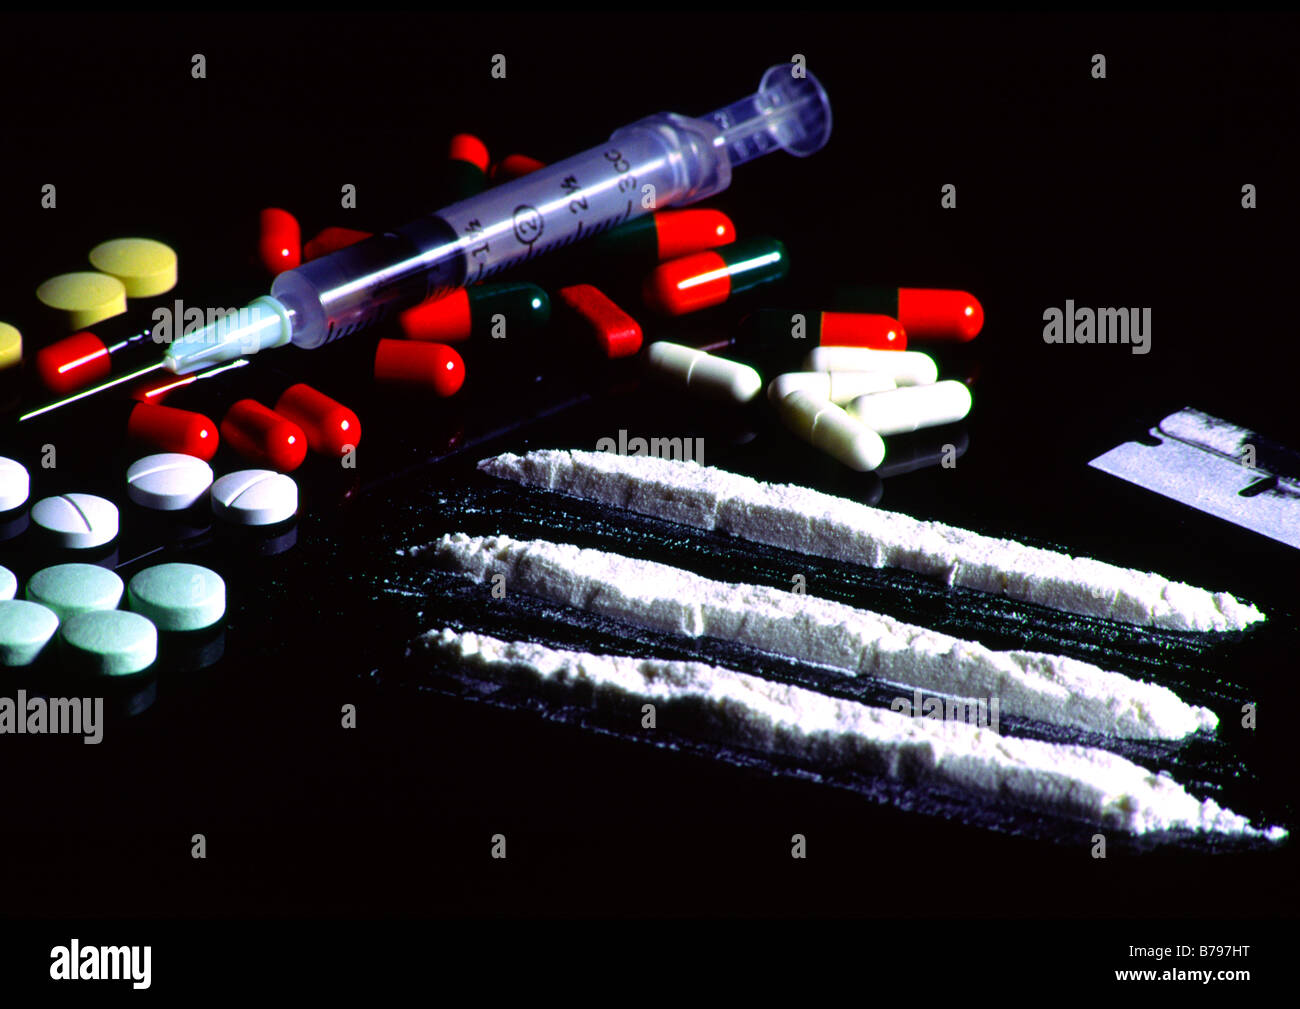 illegal addictive drugs on a glass table including cocaine, pills and a syringe Stock Photo